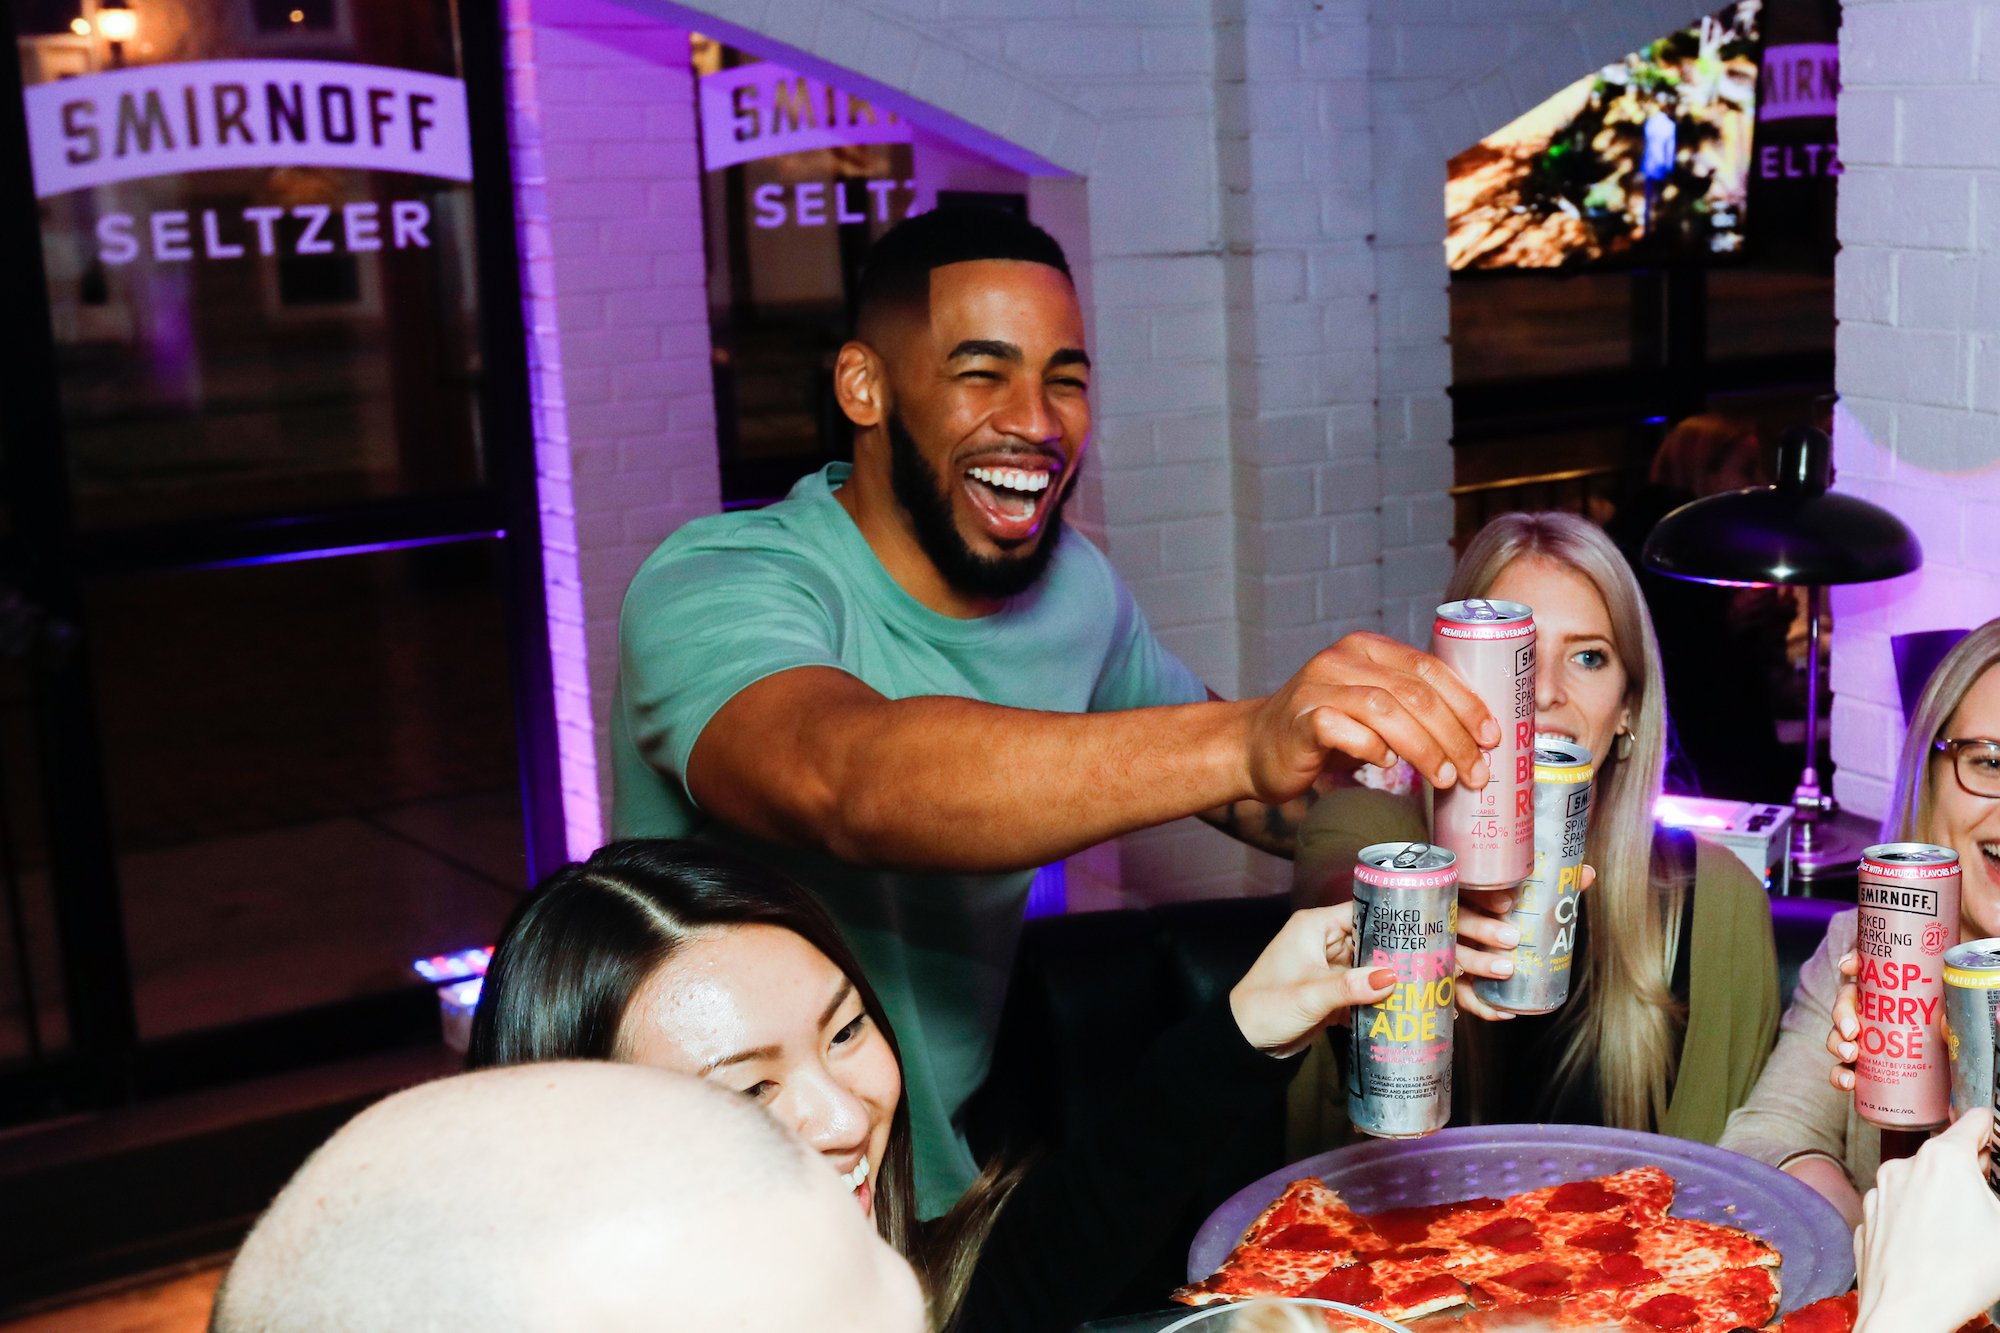 Mike Johnson and fans toast to the end of an amazing Bachelor season with Smirnoff Seltzer on March 10, 2020.